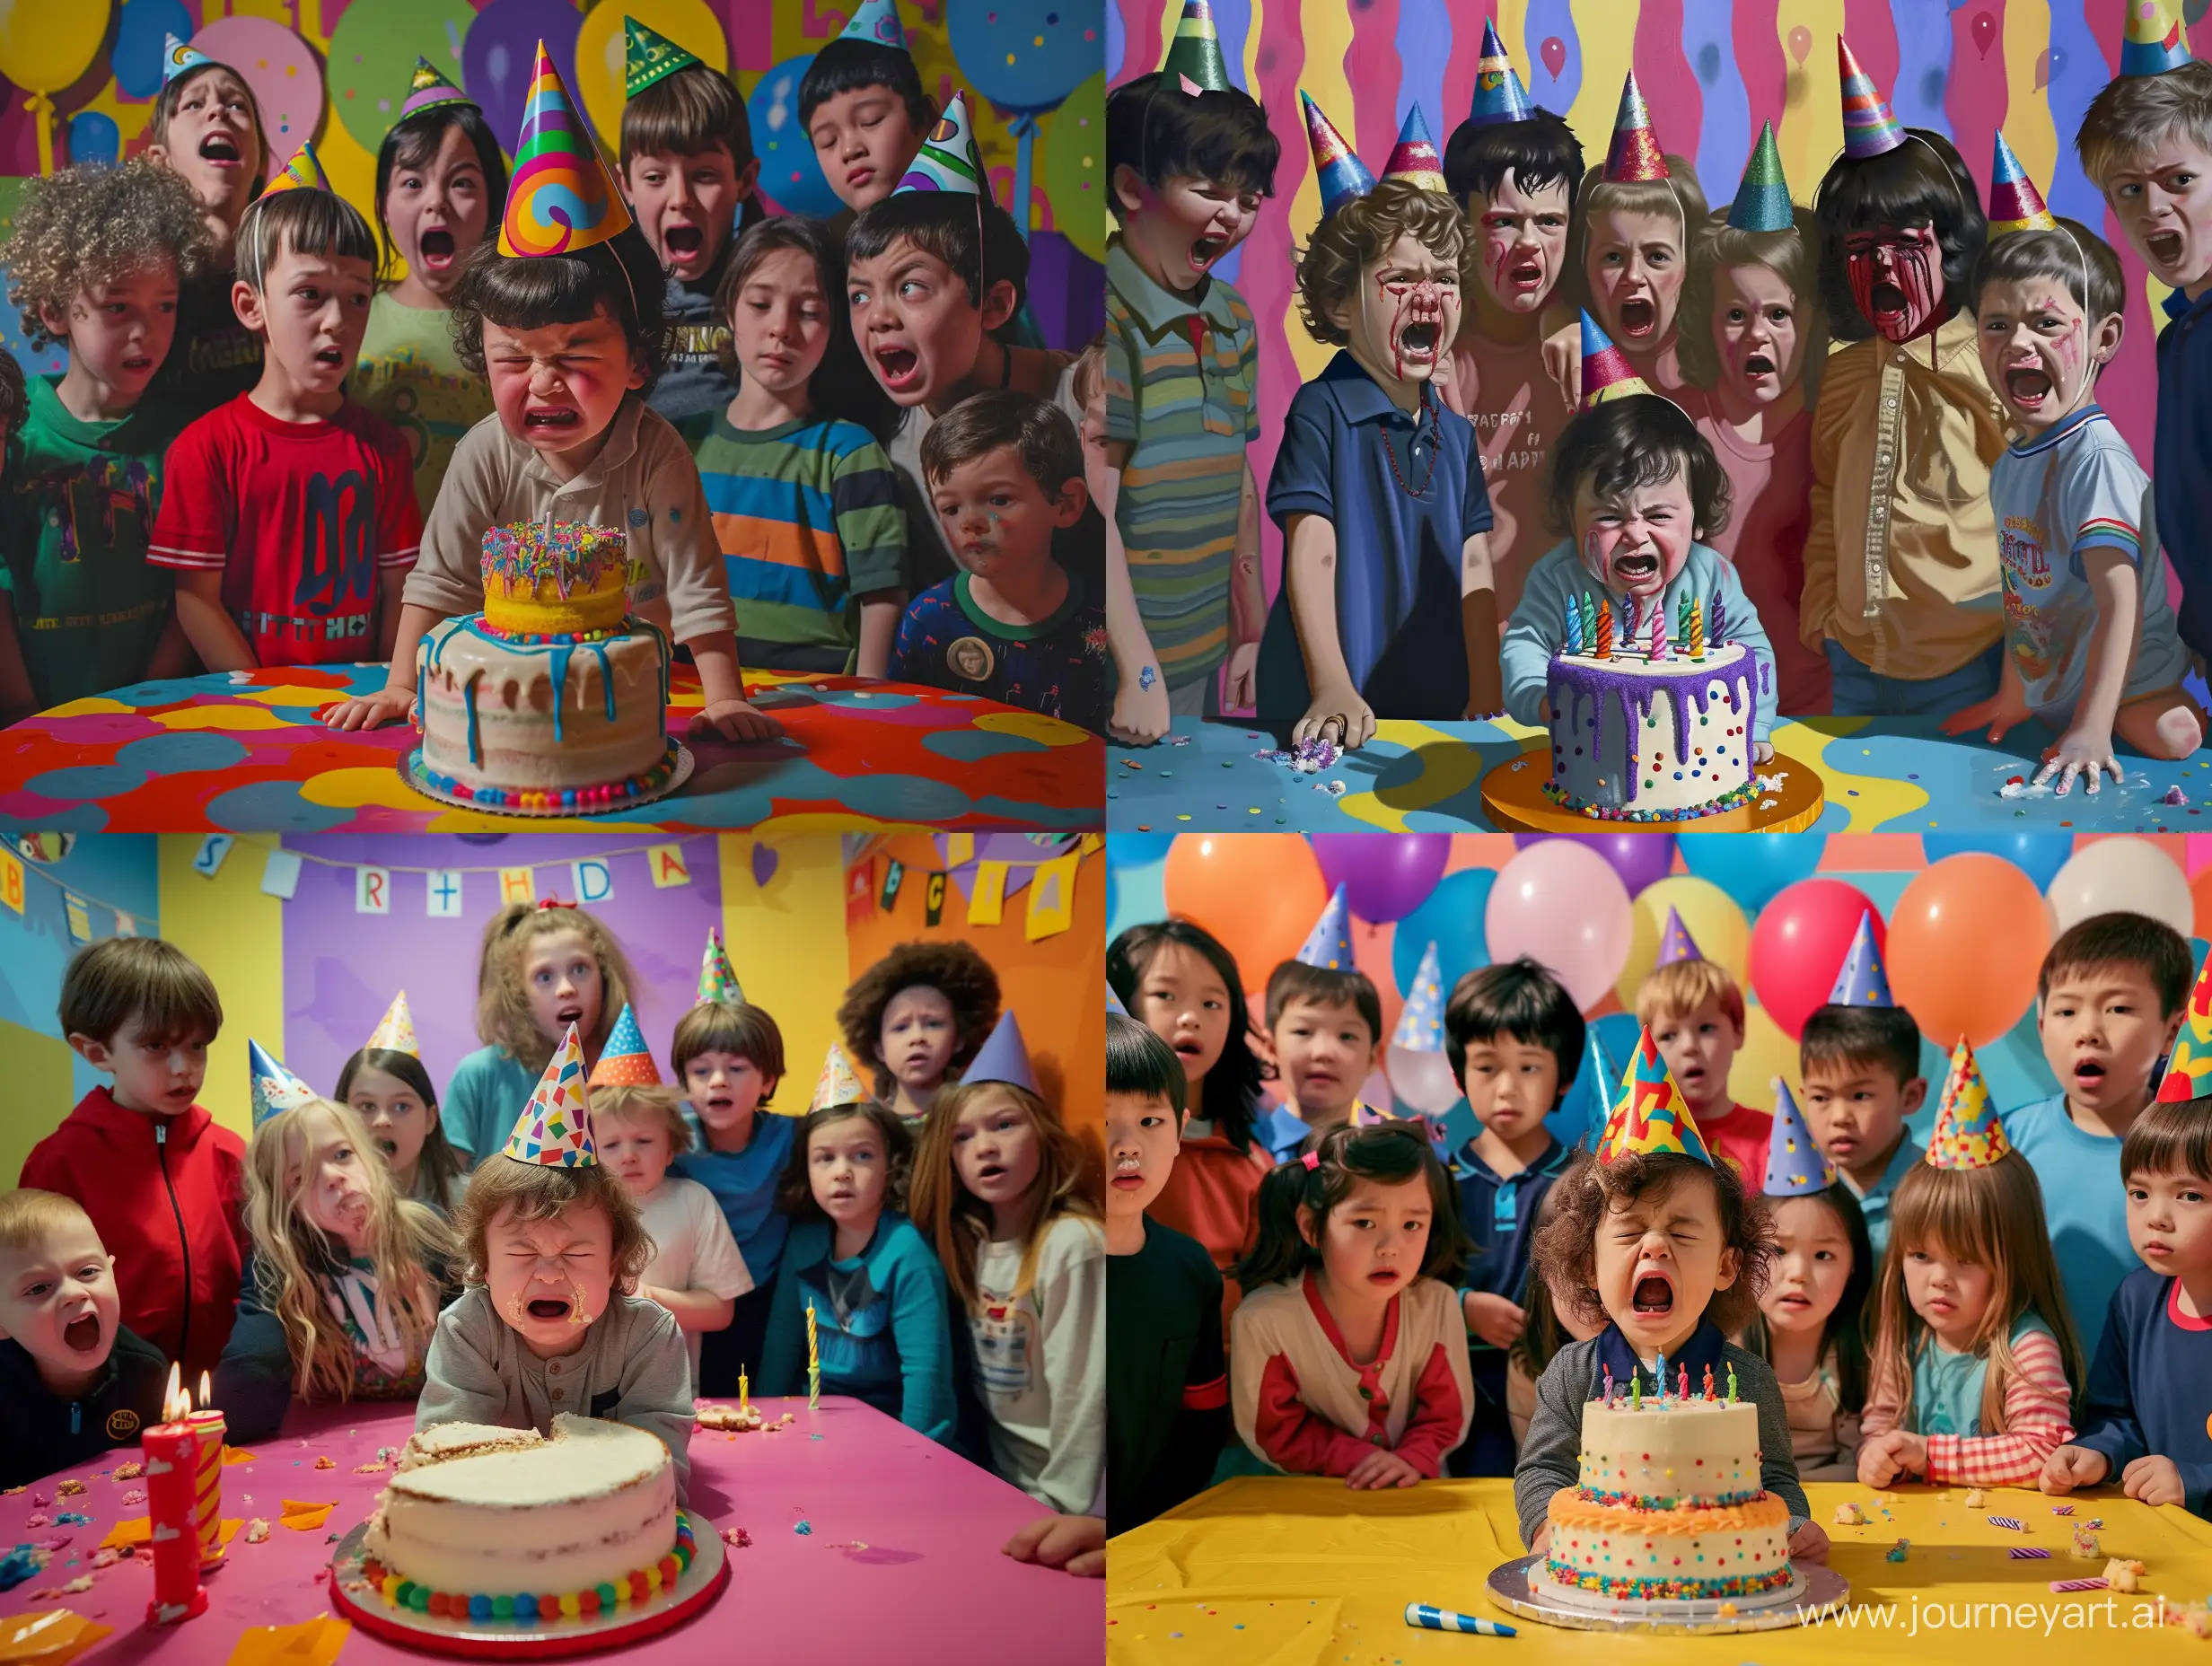 A small child standing over a birthday cake wearing a party hat crying surrounded by many taller children who are all looking at him and all have terrifying unnatural smiles in a colorful party room at a birthday party realistic